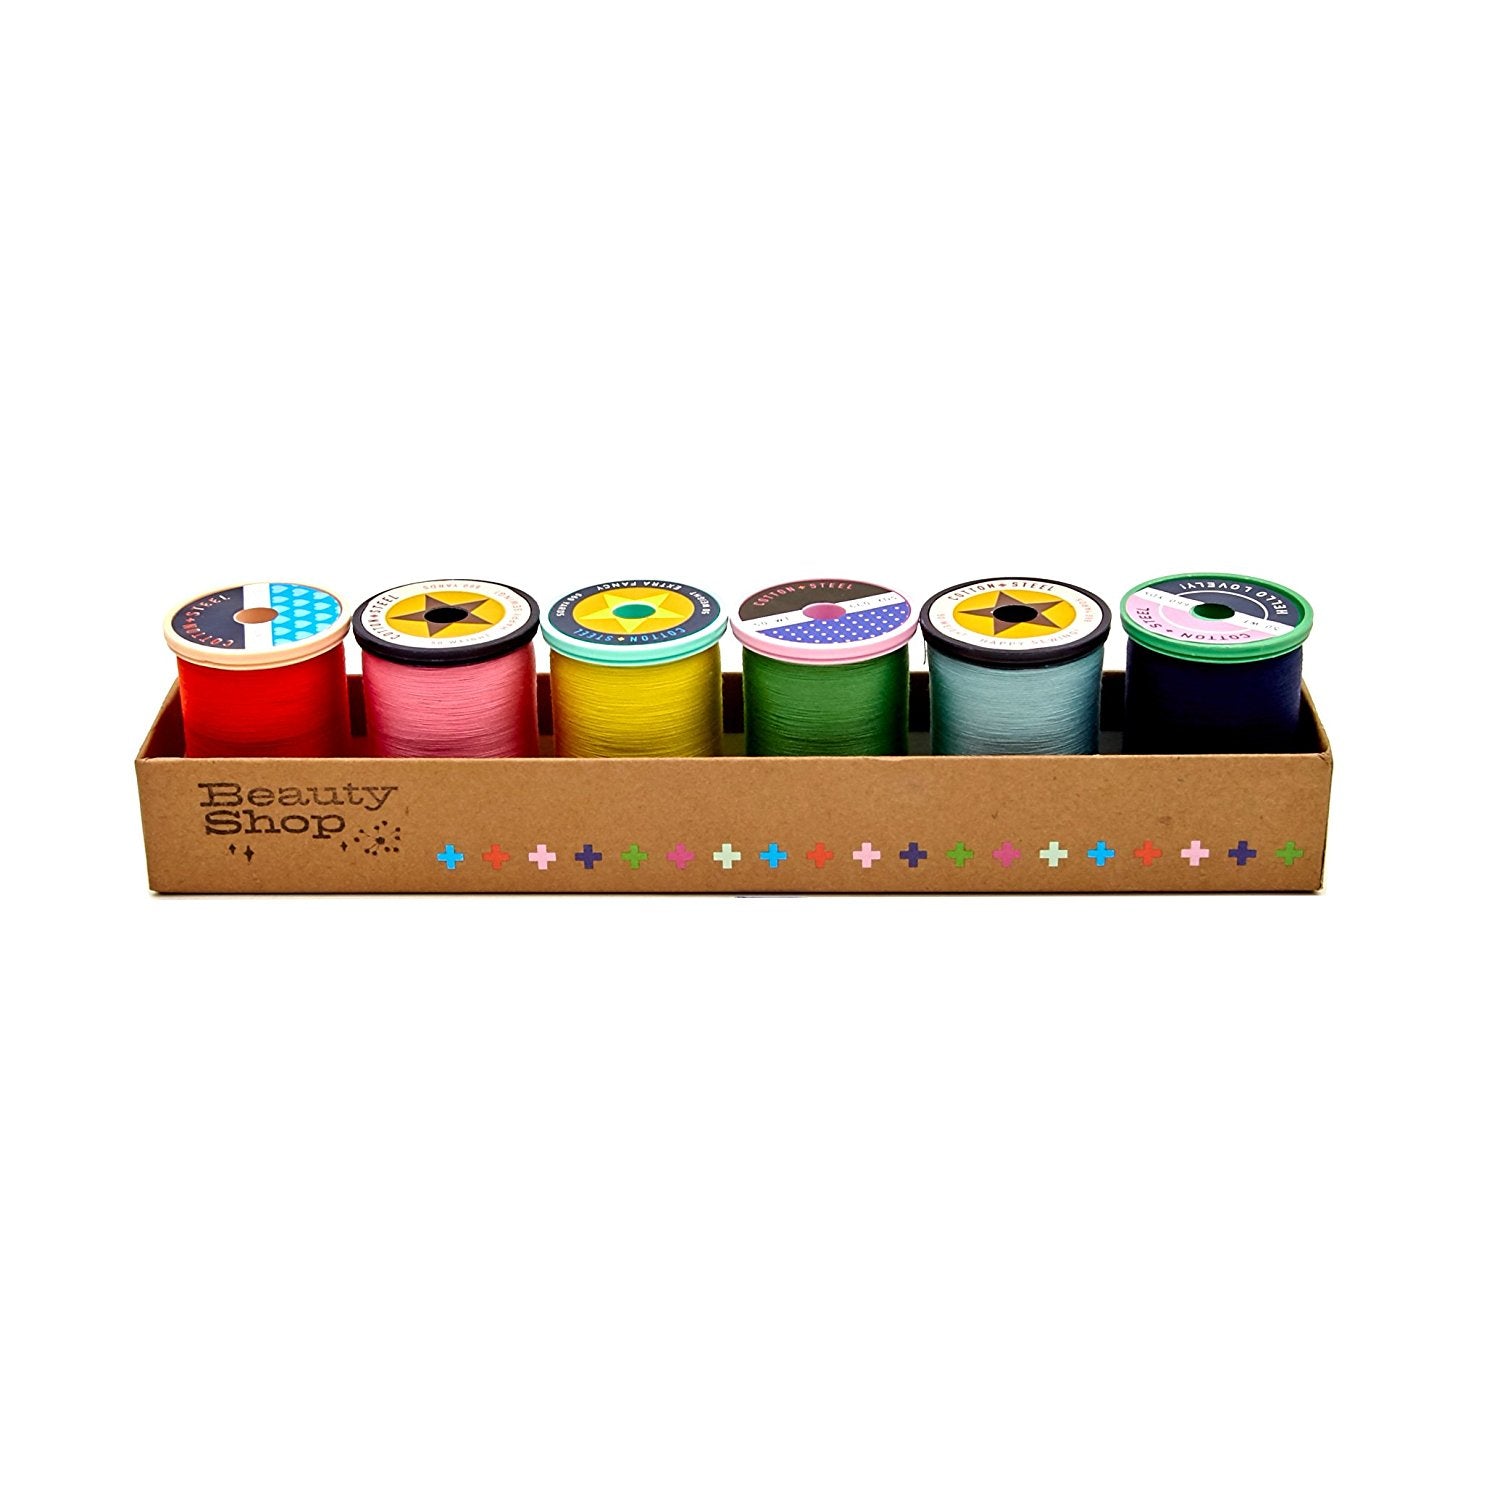 Cotton + Steel 50 wt Thread Box from Sulky - Beauty Shop - 6 spools